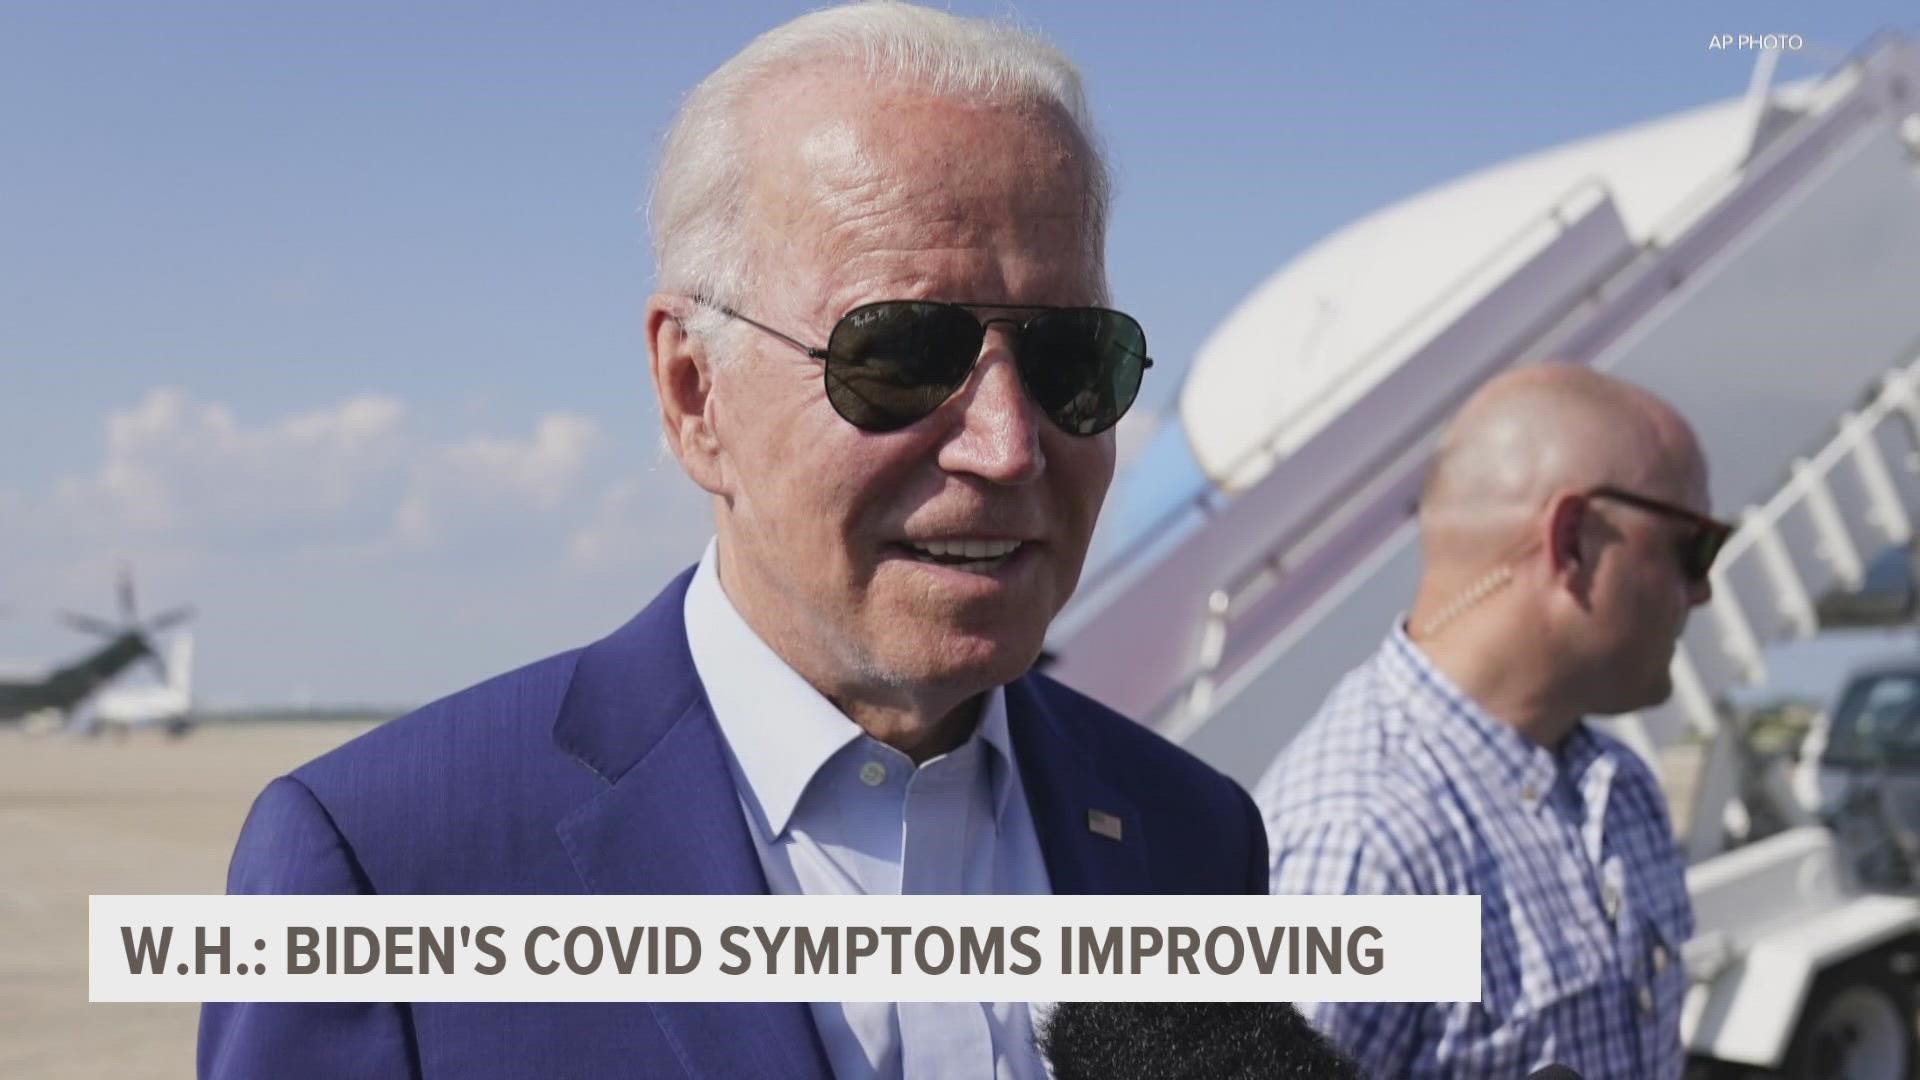 The president’s doctors said Friday his mild COVID symptoms were improving and he was responding well to treatment.